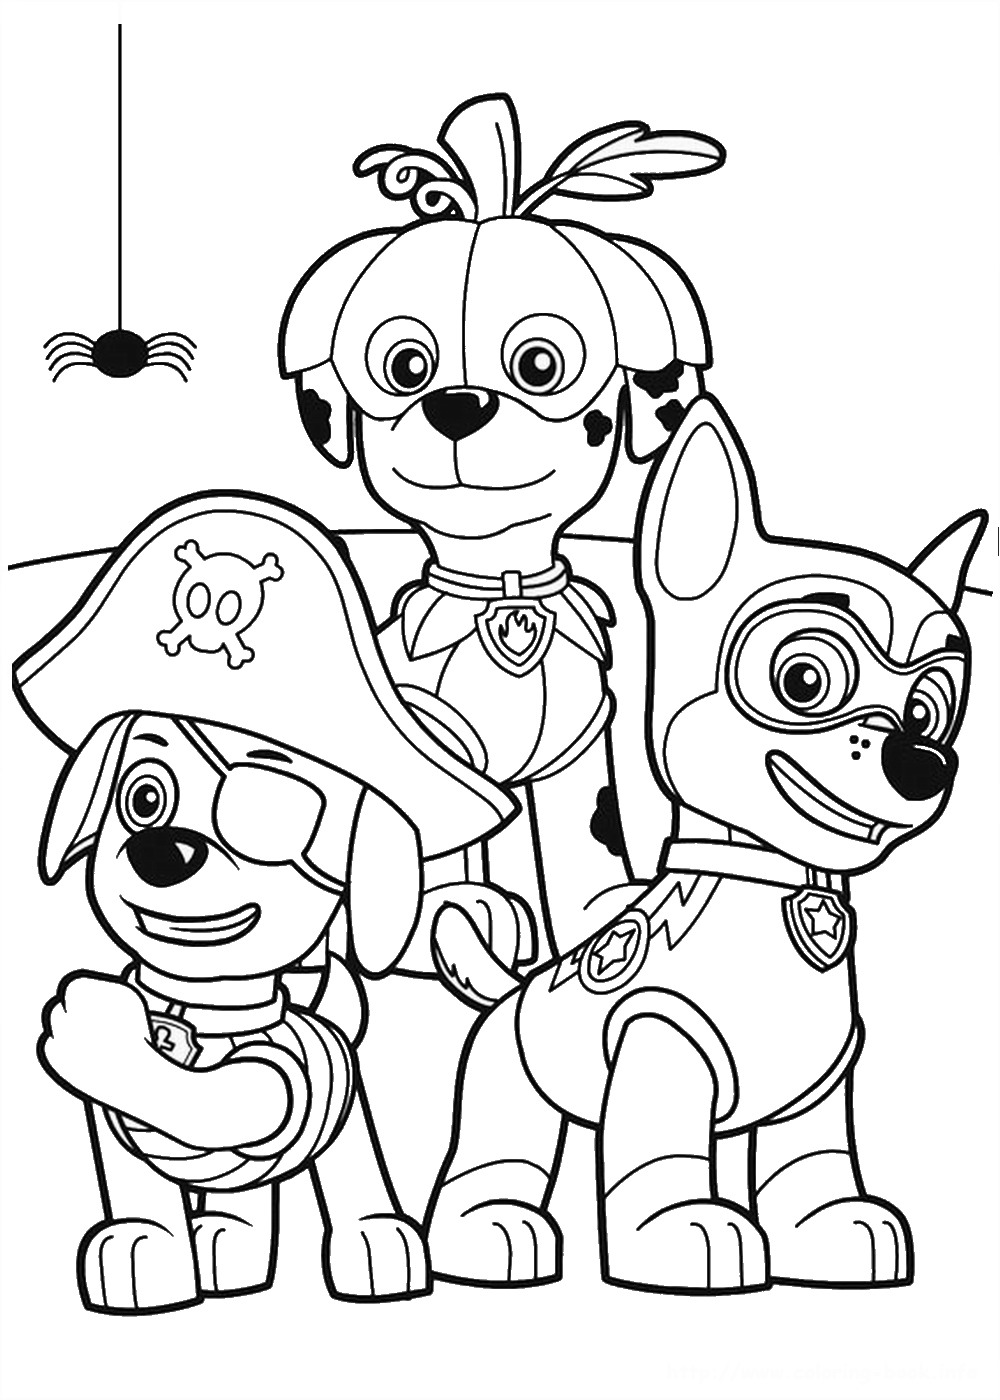 Paw Patrol Coloring Pages FREE Printable 122